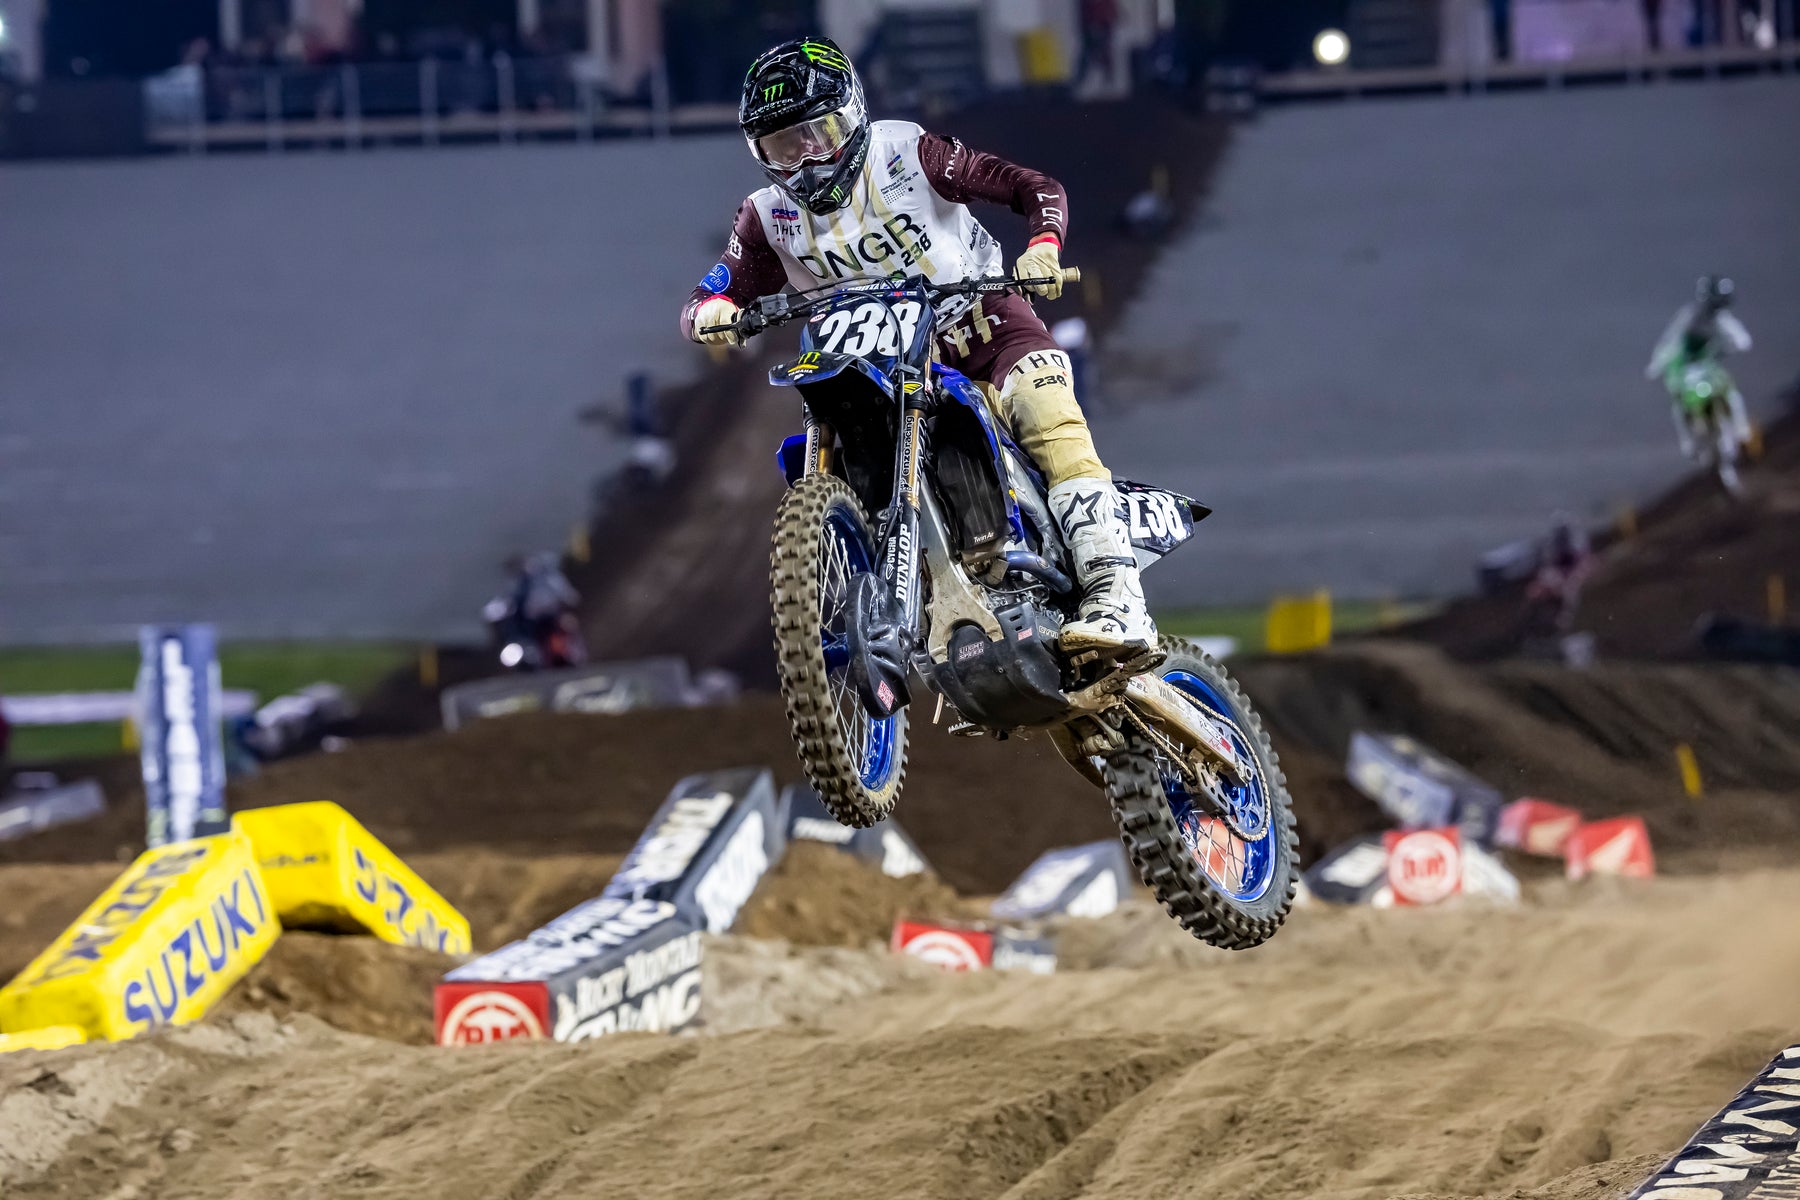 HAIDEN DEEGAN WINS 250 SUPERMOTORCROSS FINALE TO SECURE TITLE AT LOS ANGELES SHOWDOWN